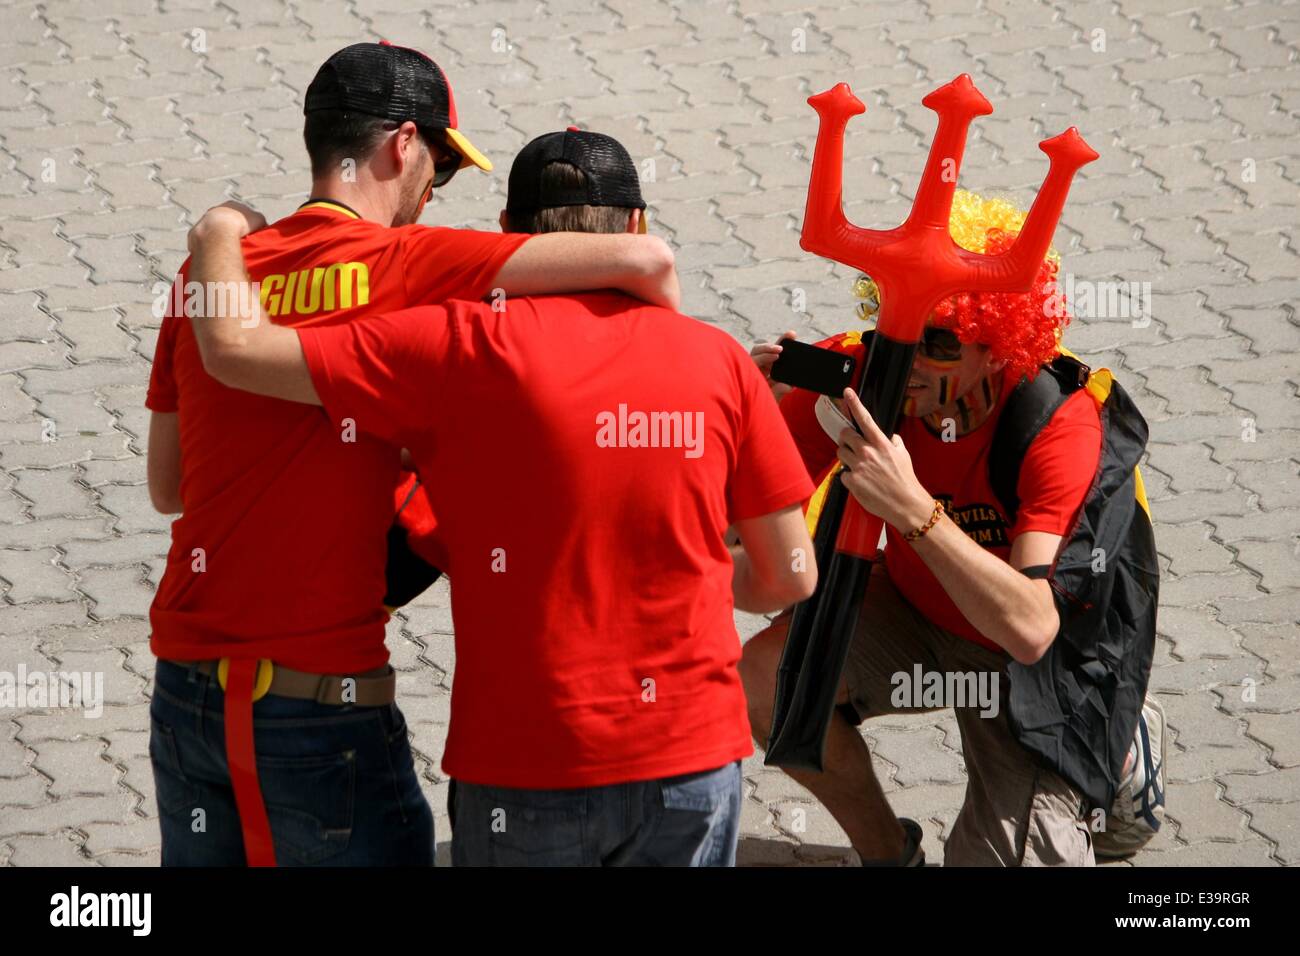 Rio de Janeiro, Brazil. 22nd June, 2014. 2014 FIFA World Cup Brazil. Belgian fans arriving at Maracanã to watch the match between Belgium and Russia. Belgium won 1-0, thus qualifying for the round of 16. Rio de Janeiro, Brazil, 22nd June, 2014. Credit:  Maria Adelaide Silva/Alamy Live News Stock Photo